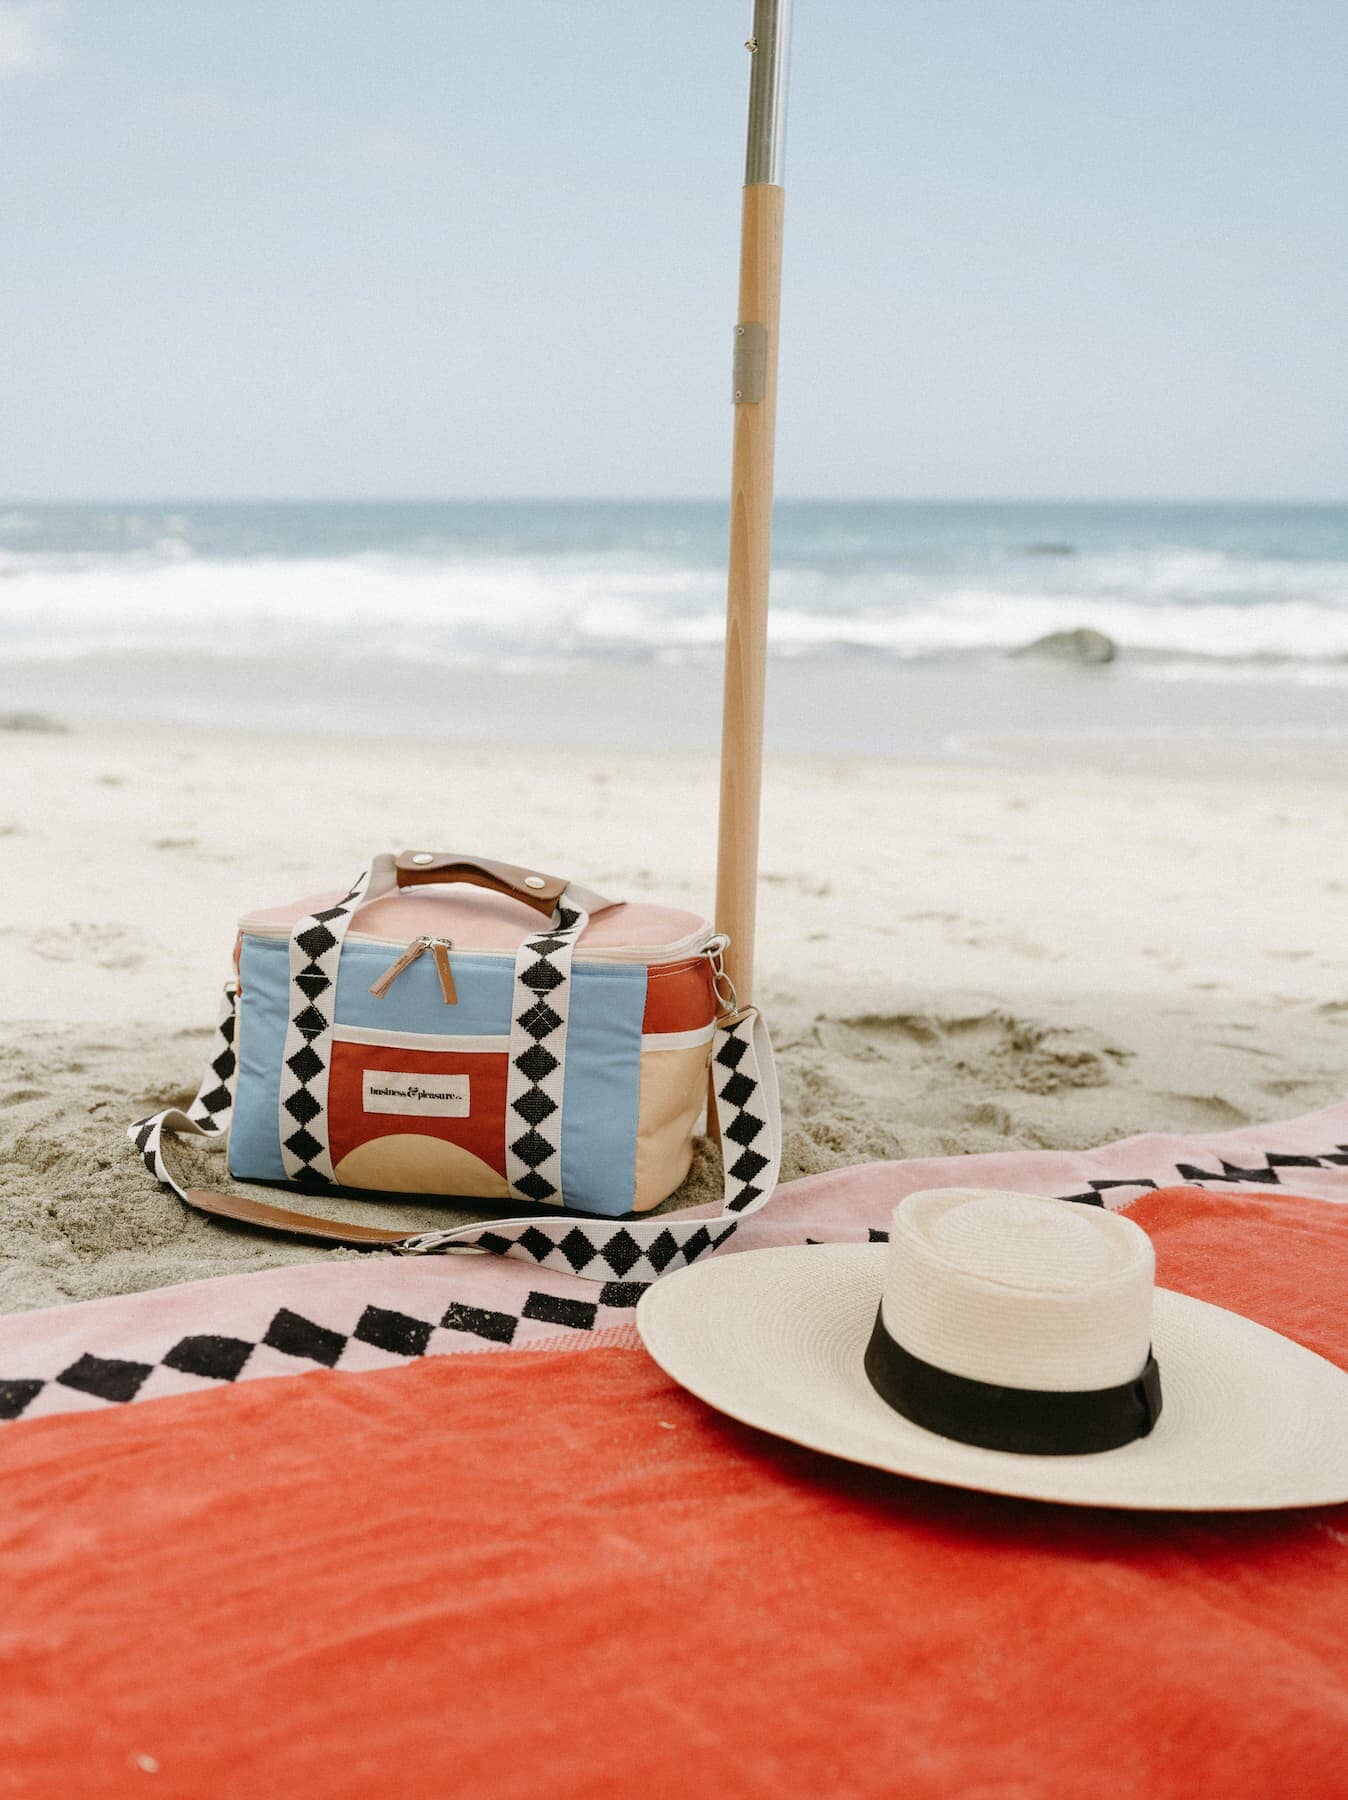 diamond pink cooler on the beach with beach towel and hat